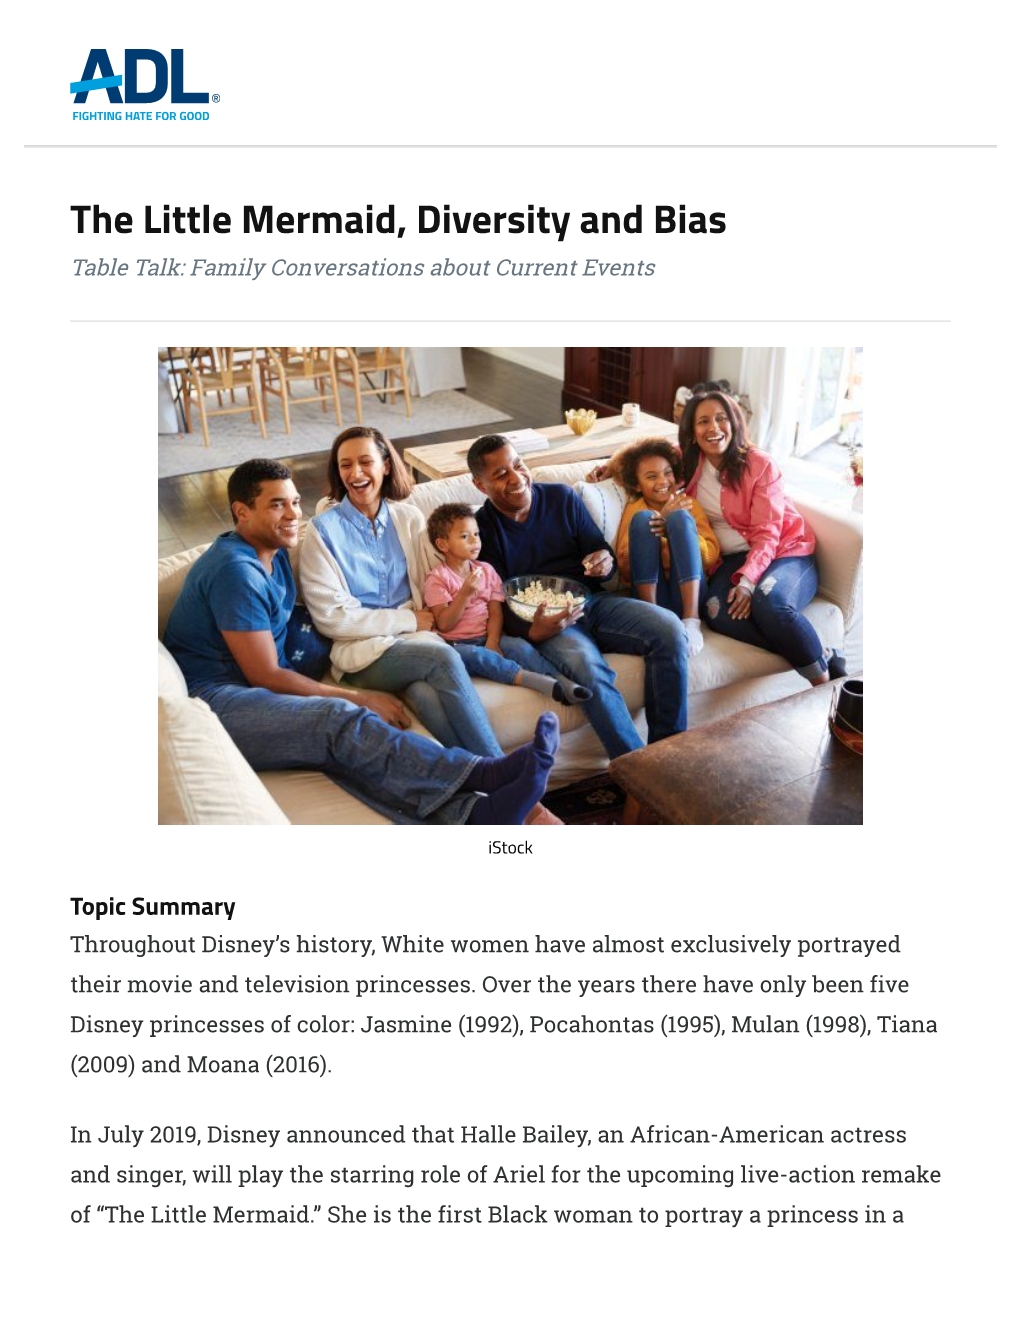 The Little Mermaid, Diversity and Bias Table Talk: Family Conversations About Current Events